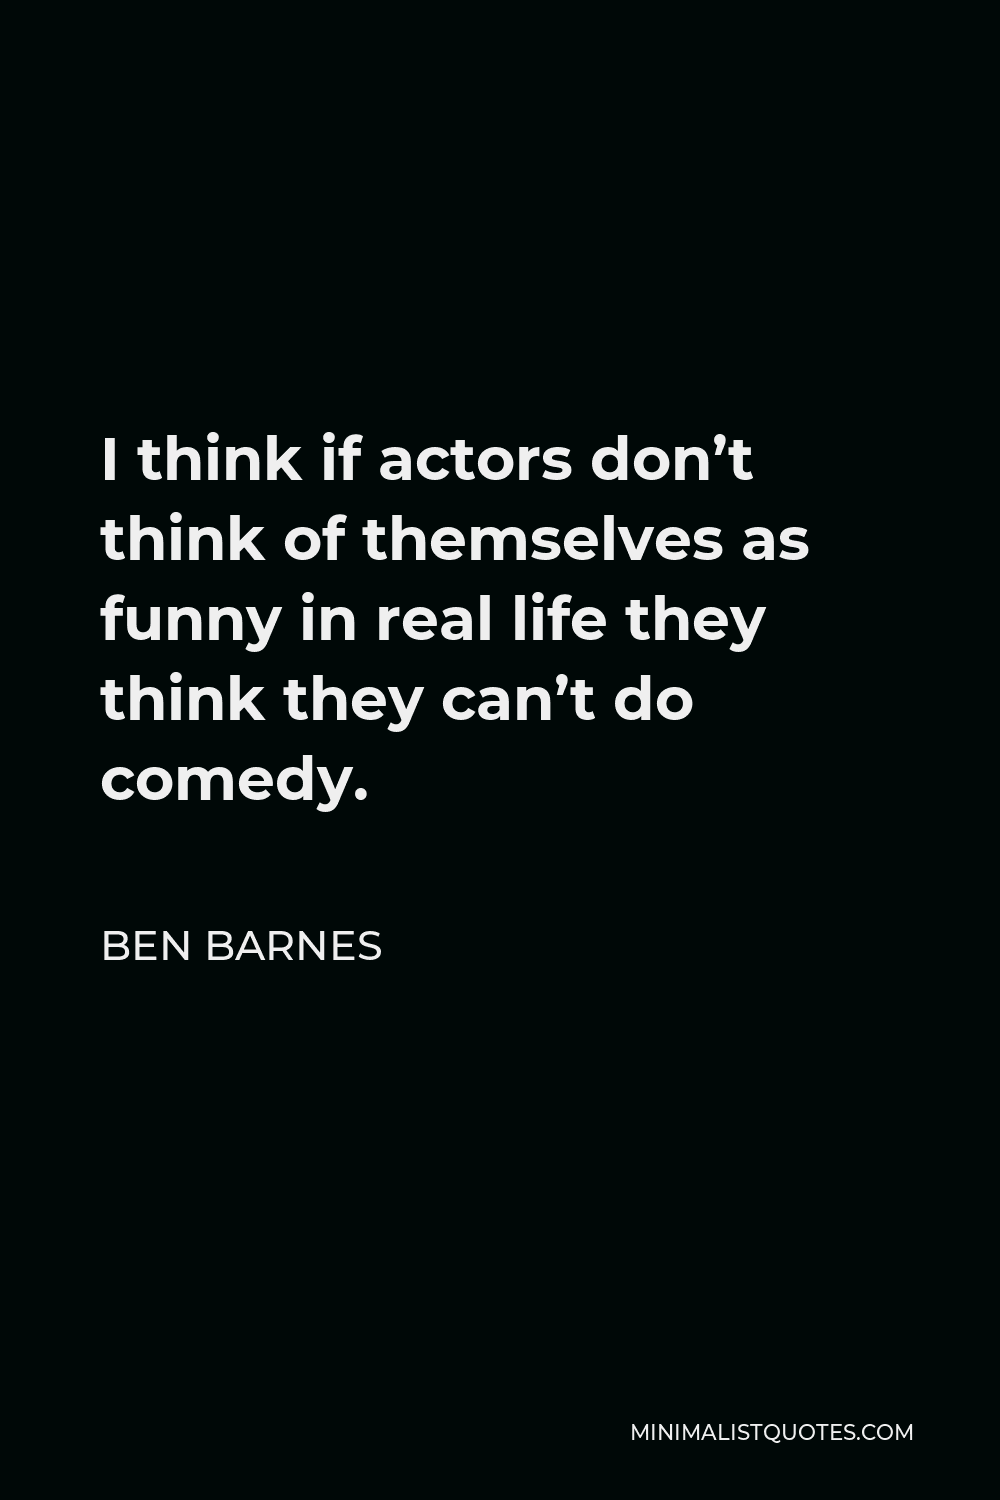 Ben Barnes Quote - I think if actors don’t think of themselves as funny in real life they think they can’t do comedy.